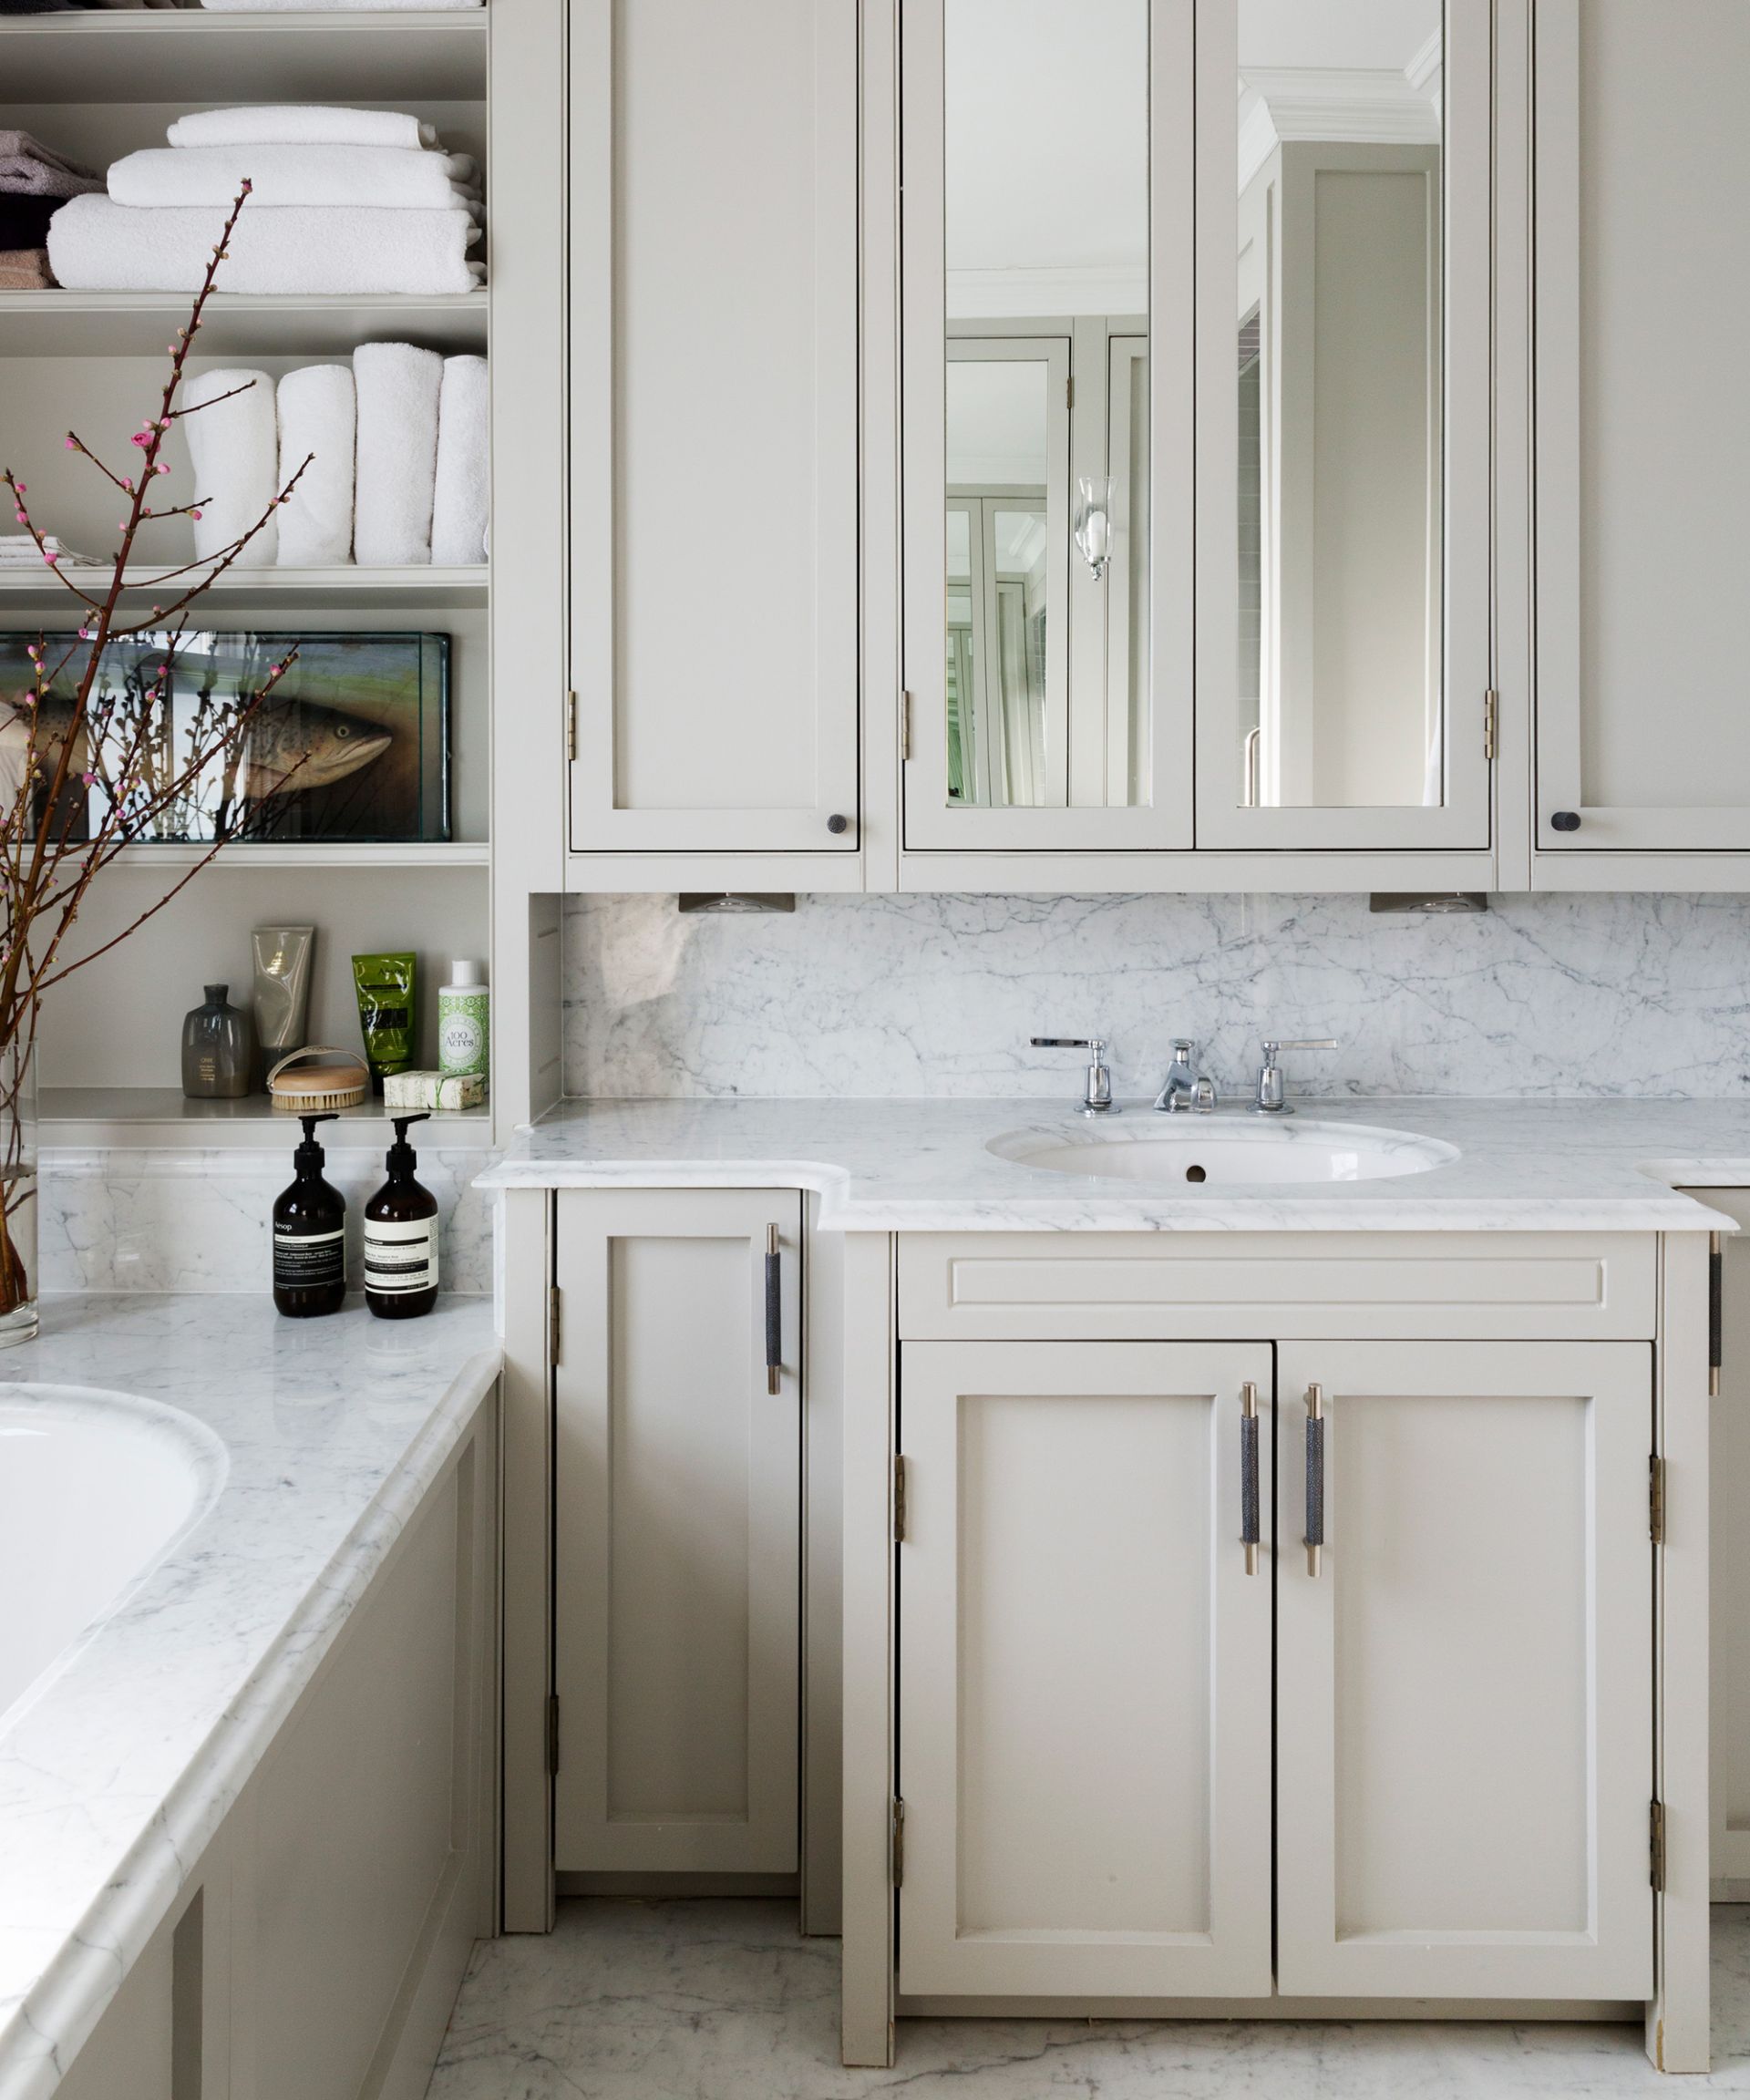 <p>                     ‘I would recommend a third of the budget goes towards storage,’ advises interior designer, Monita Cheung.                    </p>                                      <p>                     ‘If you invest well, furniture can easily become the main focal point. A key piece in every bathroom is a basin, therefore incorporating under-counter furniture is essential.’                   </p>                                      <p>                     ‘Large bathroom vanity units fitted underneath the basin with an additional internal drawer always helps to hide the daily clutter.                    </p>                                      <p>                     'There are many different bathroom vanities that will create ample storage. For example, a jumbo drawer base unit provides storage for large towels and tall bottles, while a sleek mirror cabinet can be used to hide the electric toothbrush/shaver, keeping surfaces clear.                    </p>                                      <p>                     'If there’s money left, a tall storage unit is always handy, especially if it can be semi-recessed into a stud wall to provide really deep storage but with a sleek exterior.’                   </p>